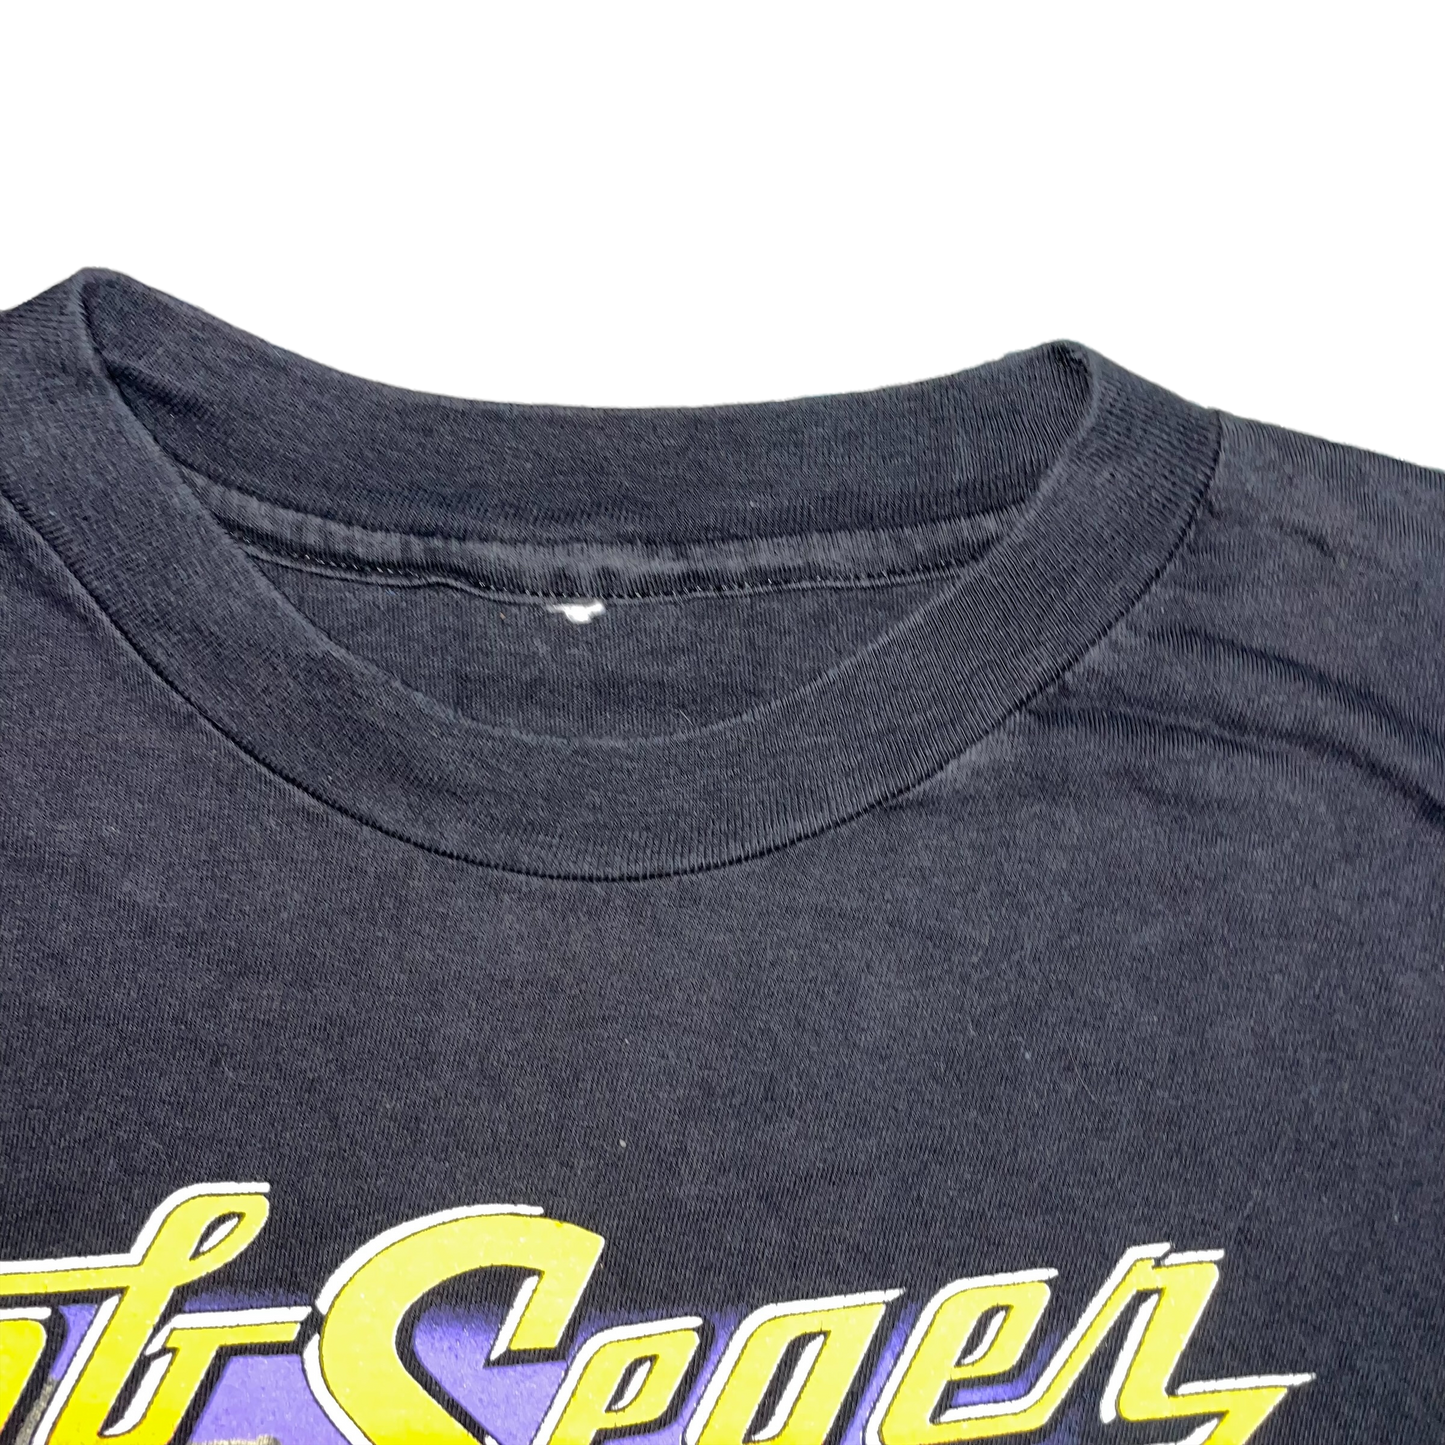 1996 Bob Seger & the Silver Bullet Band Graphic Tee